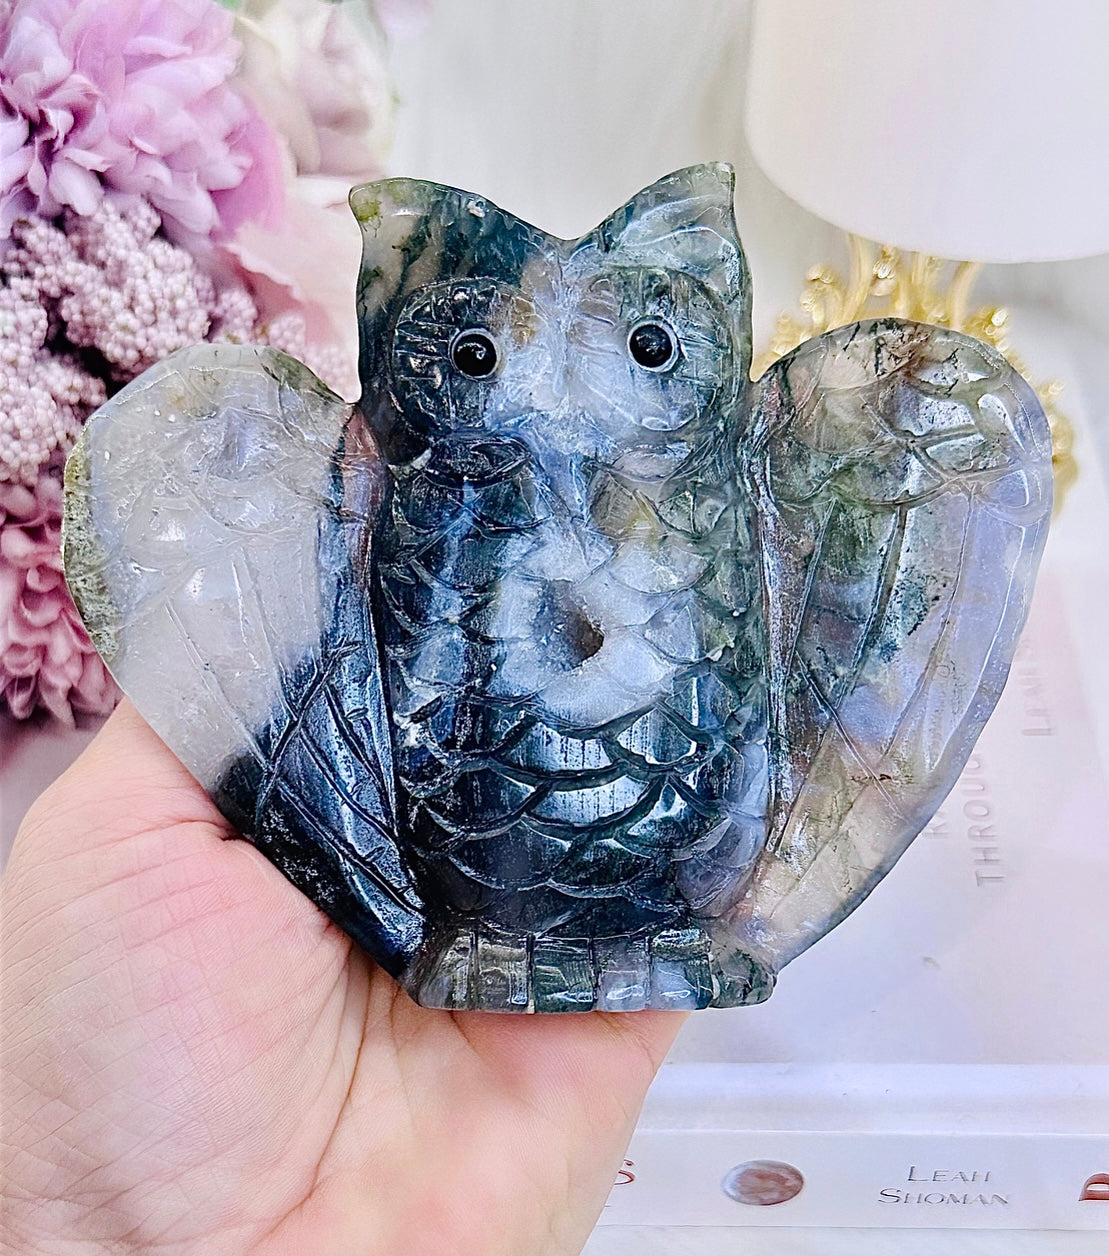 Peace & Tranquility ~ Stunning Druzy Moss Agate Carved Owl